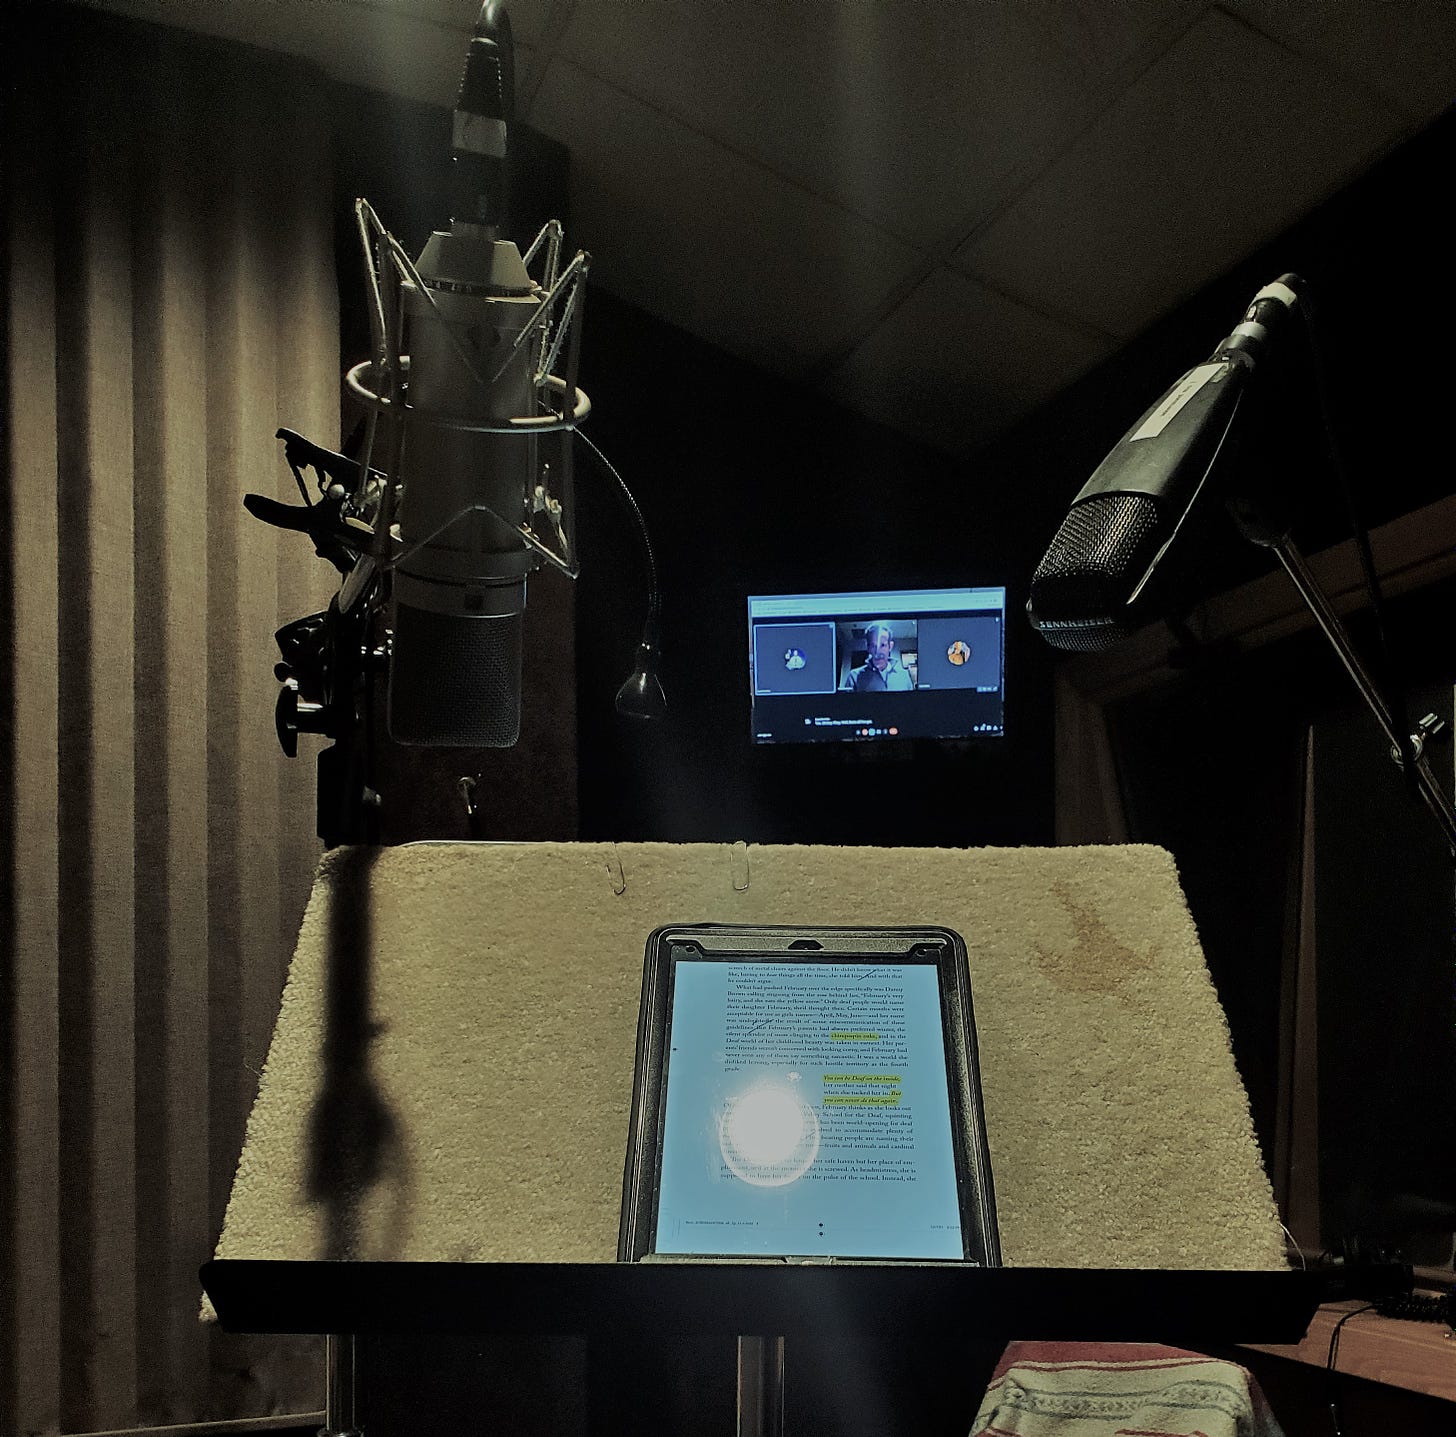 Two heavy-duty microphones hang over top of a music stand coated in fabric. True Biz on an iPad is on the stand. In the background there’s a screen with Google Meet, and to the right there’s a window looking into the larger studio.